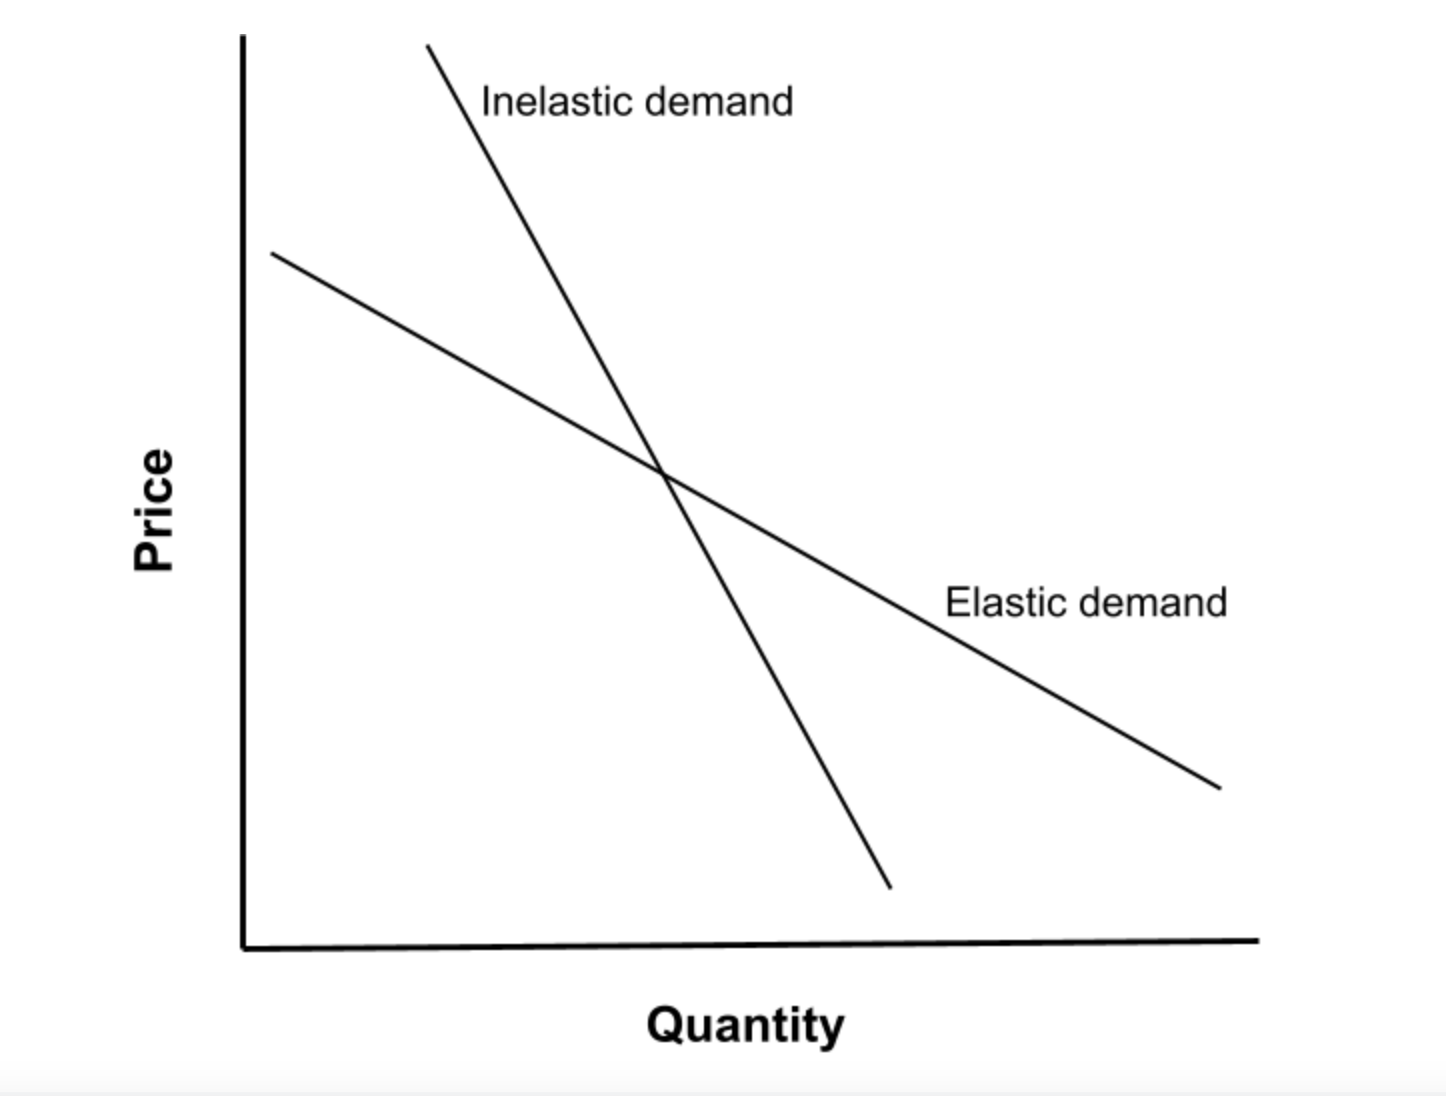 a perfectly elastic demand curve is